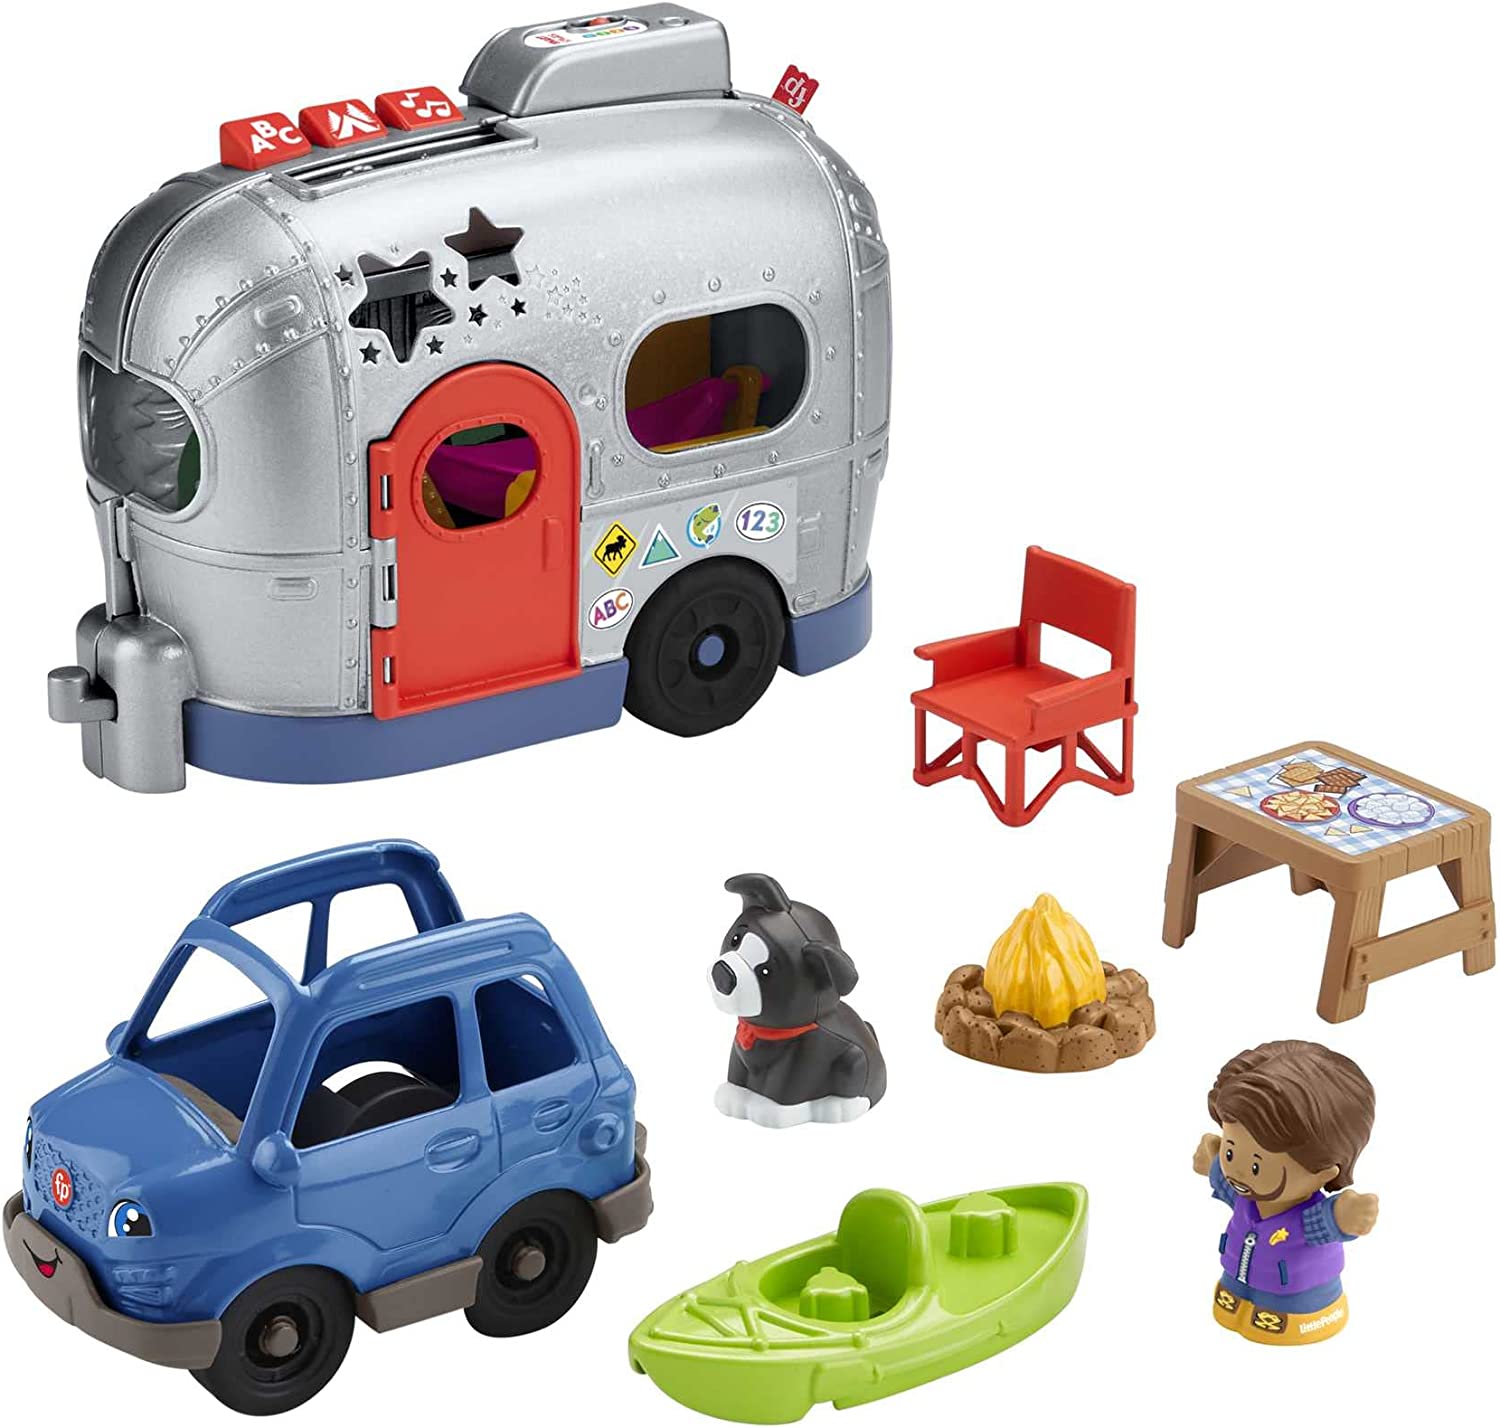 Fisher Price Light Up Learning Camper Playset